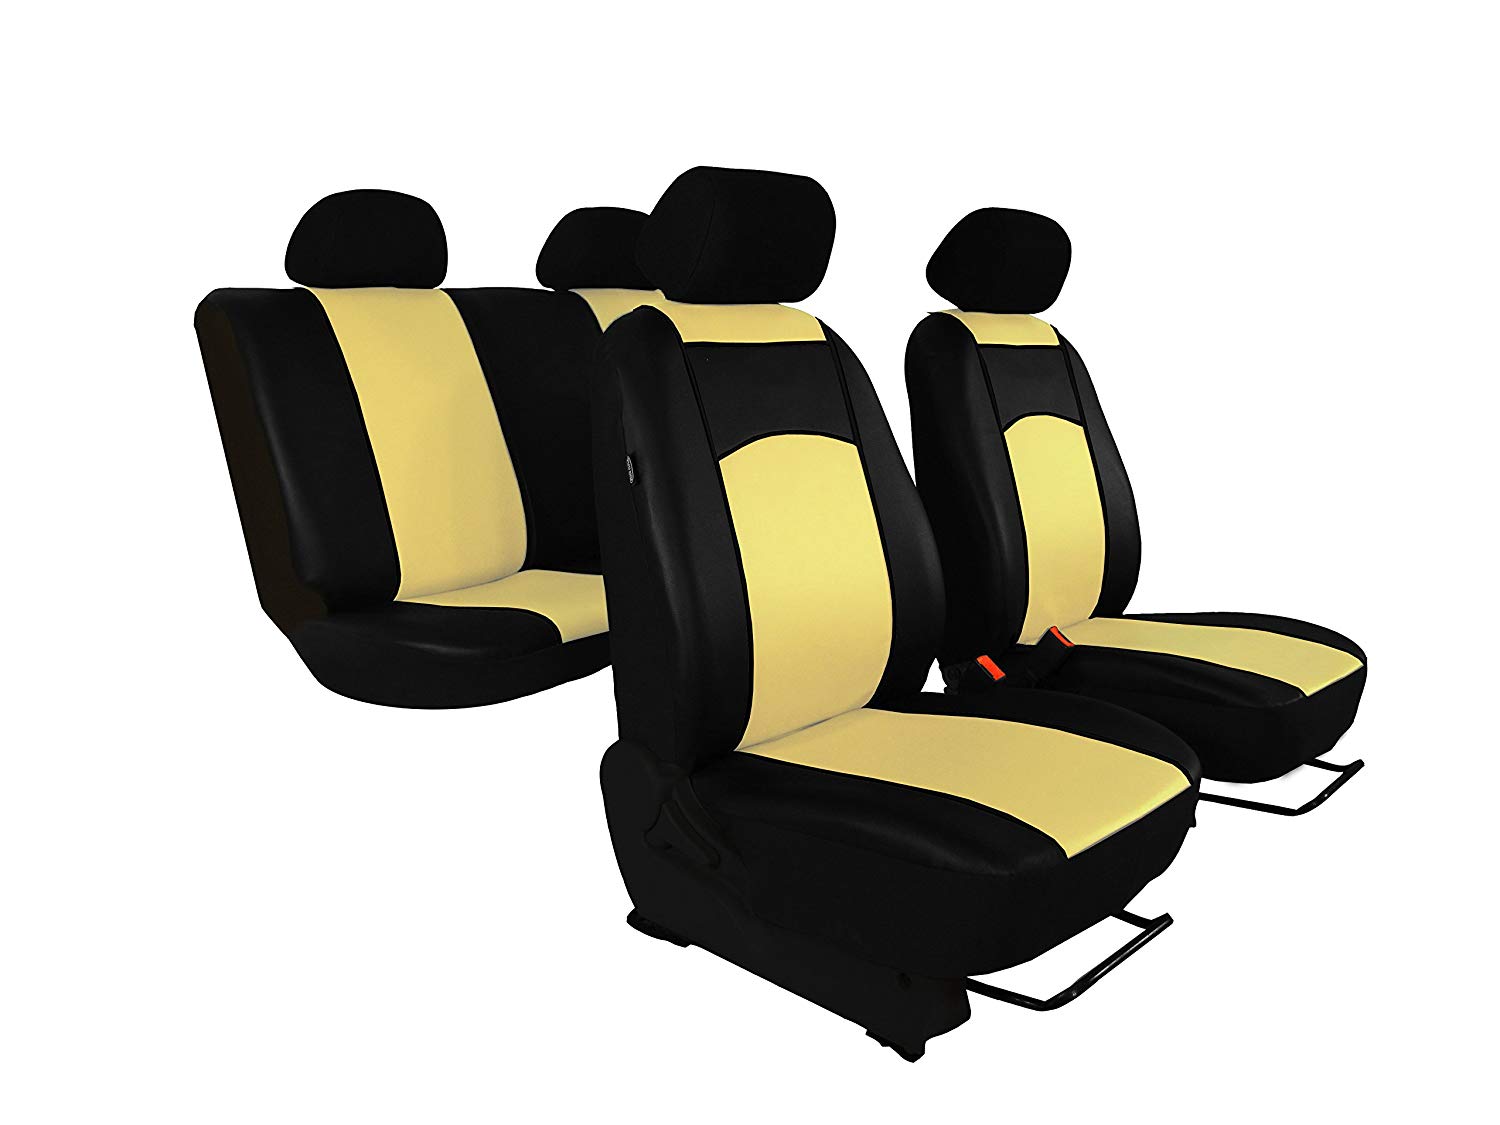 POK-TER-TUNING For Passat B6 2005-2010 (sports seats) high-quality, custom-fit seat covers, protective covers, faux leather, 7 colours